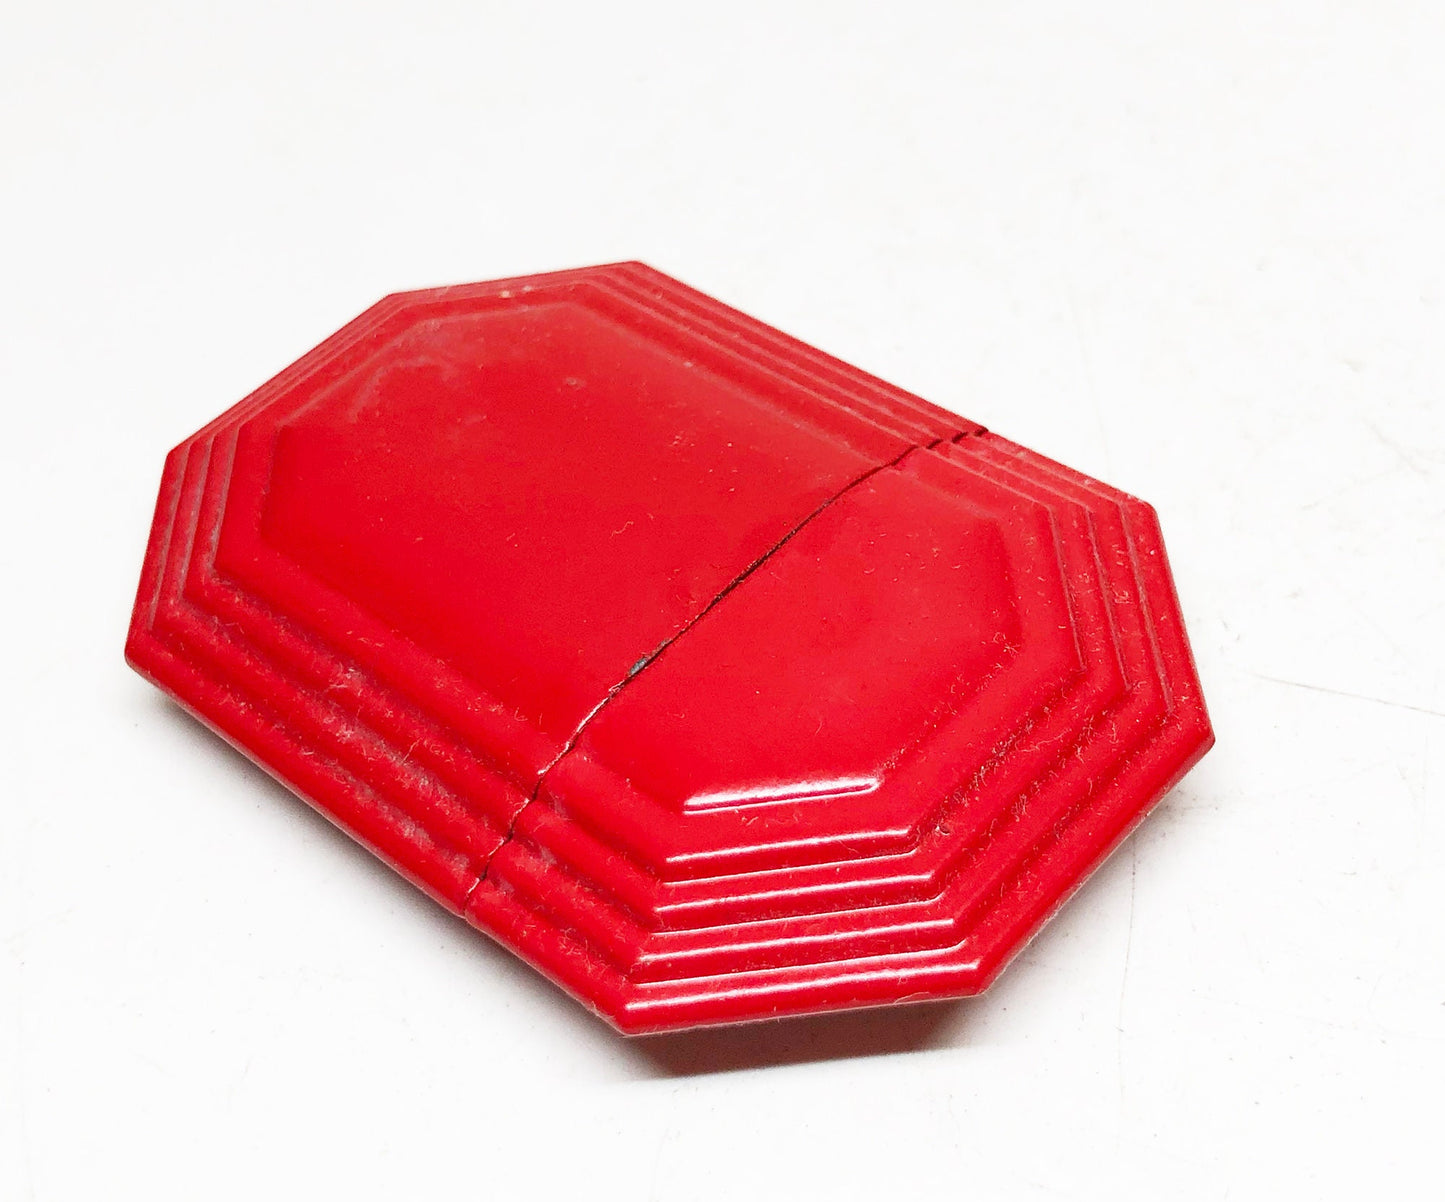 Working Eagle Red Octagonal Lighter - Vintage 1930's Trench Style Blue Steel Sleeve Lighter in Original Box - Made in USA